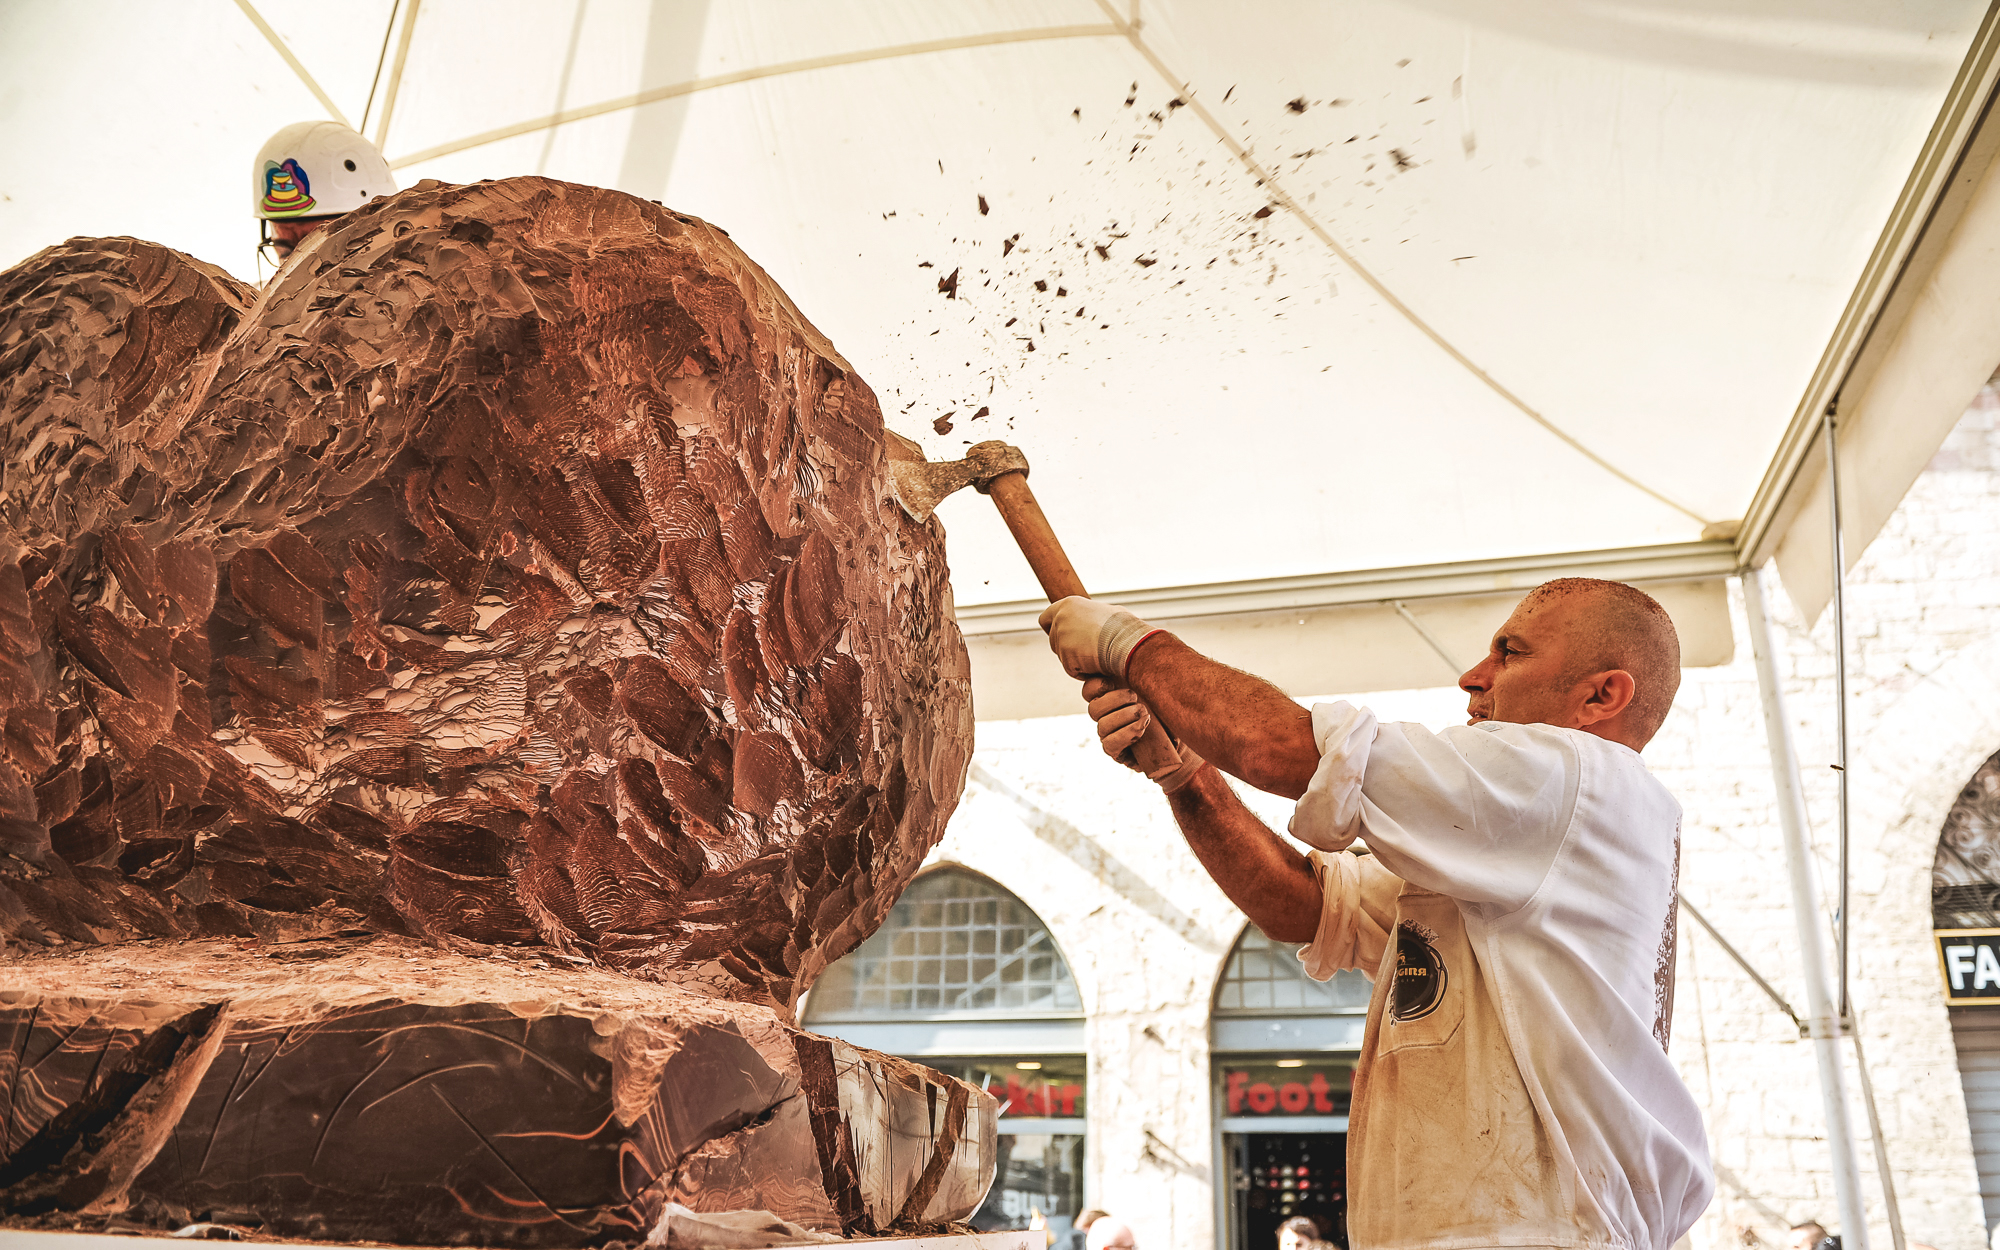 The most scrumptious Italian festival is dedicated to chocolate